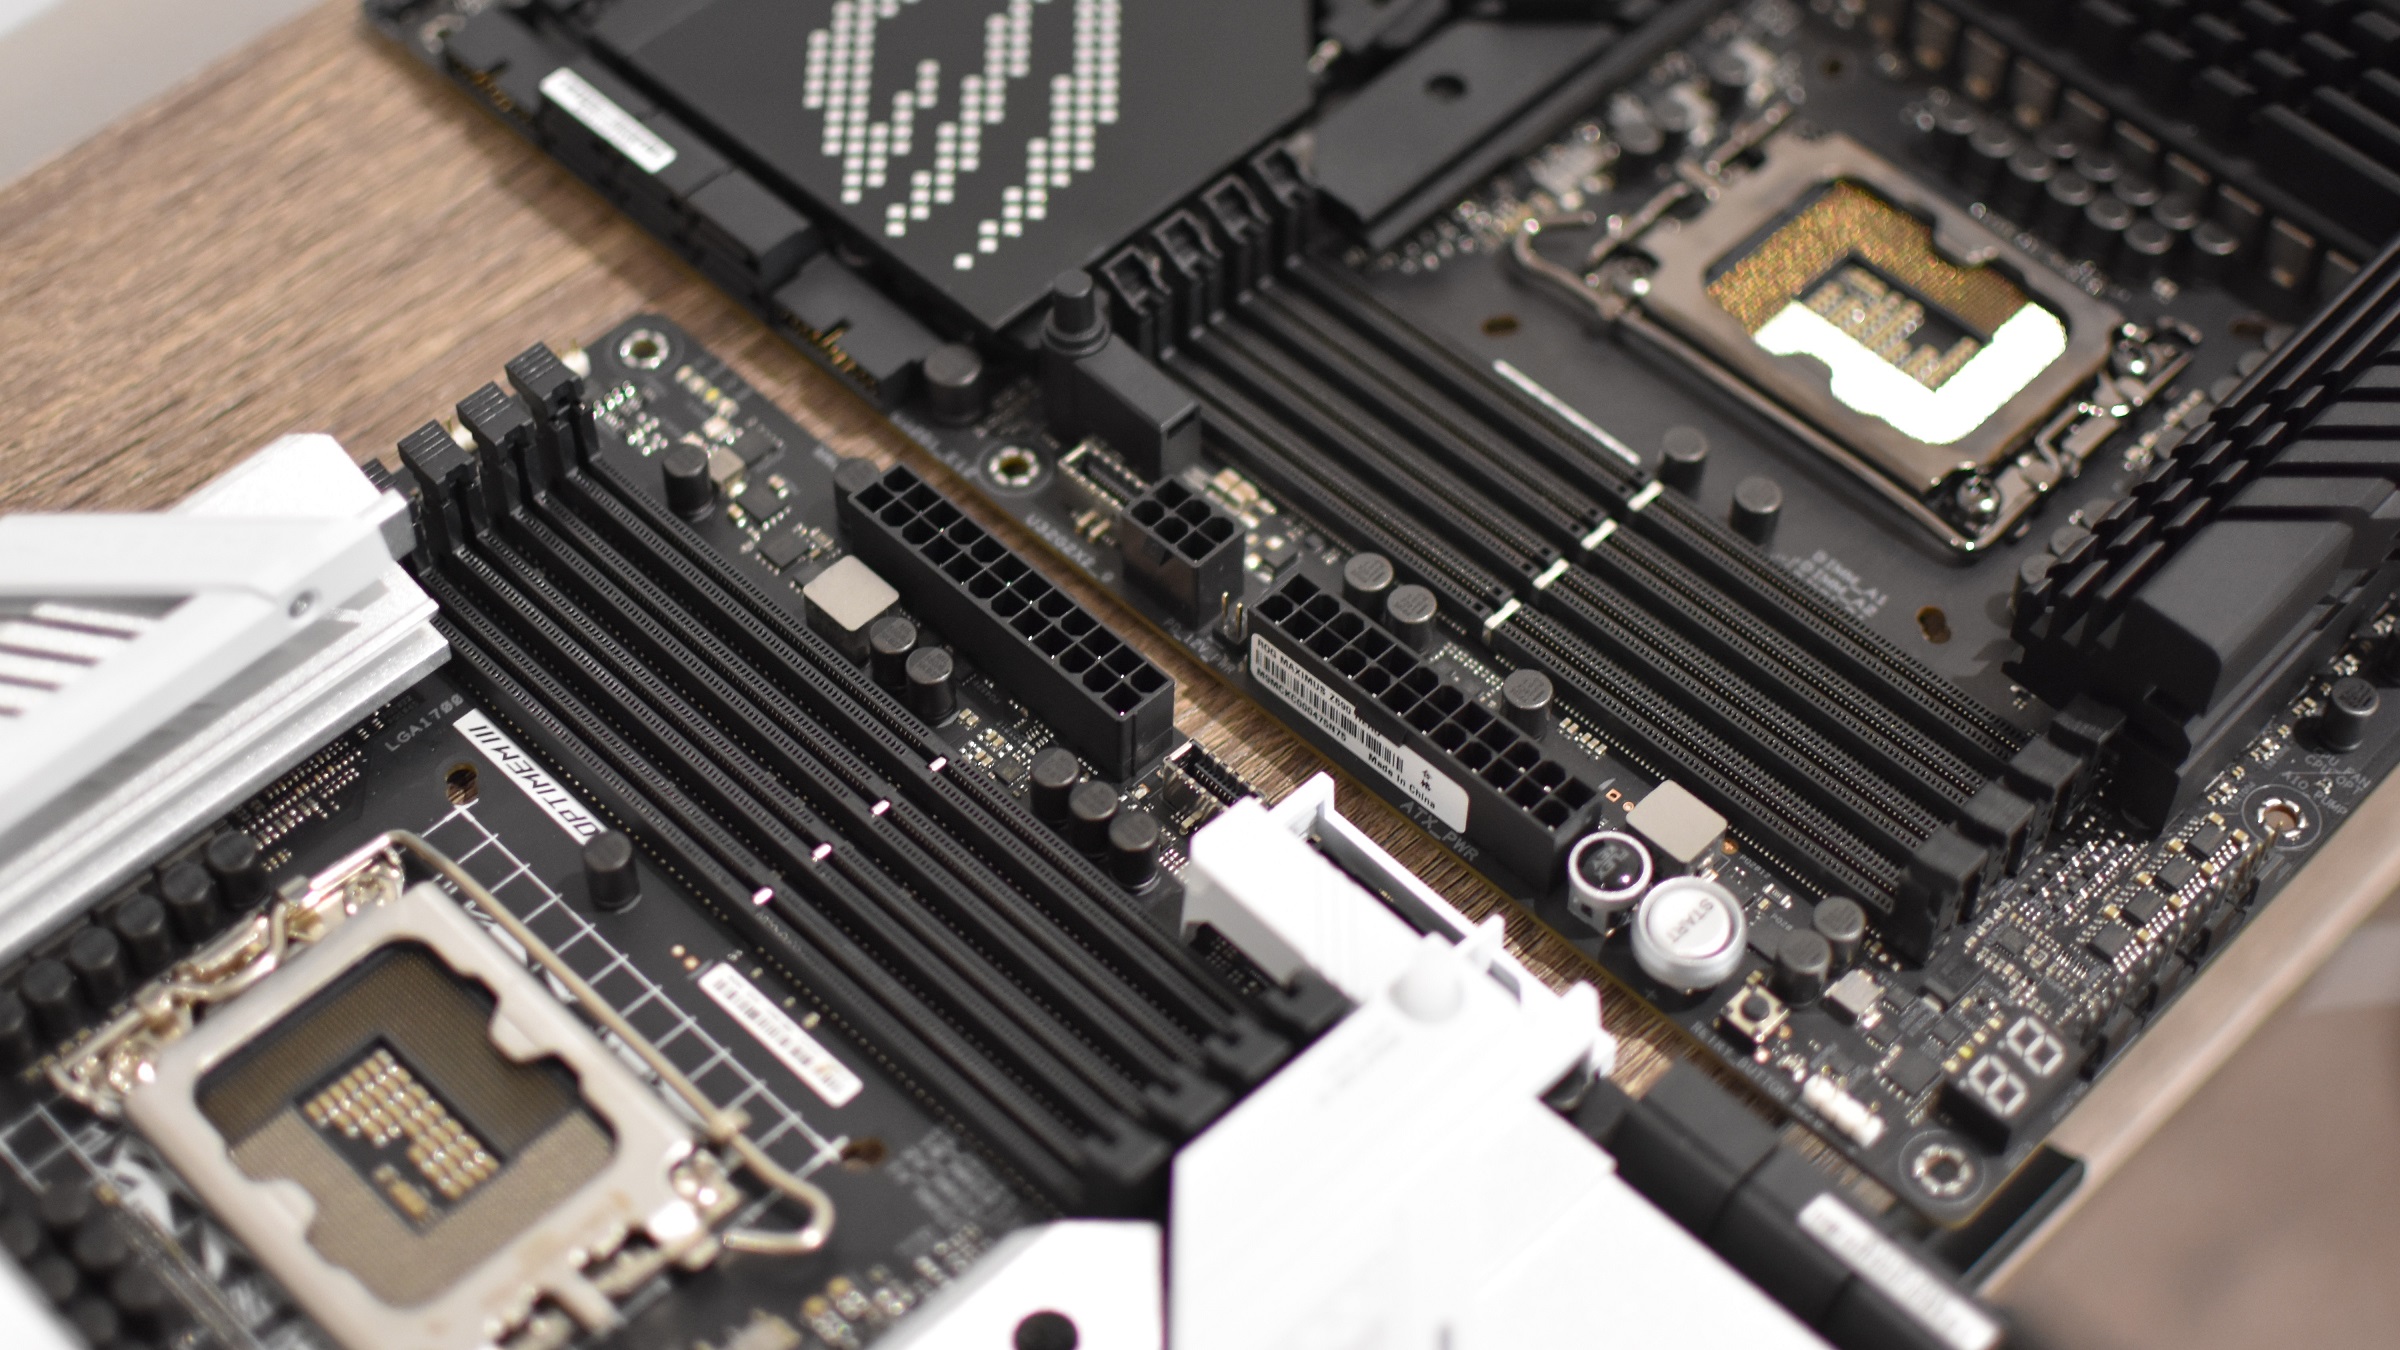 The RAM slots of two motherboards, one supporting DDR4 and one DDR5.